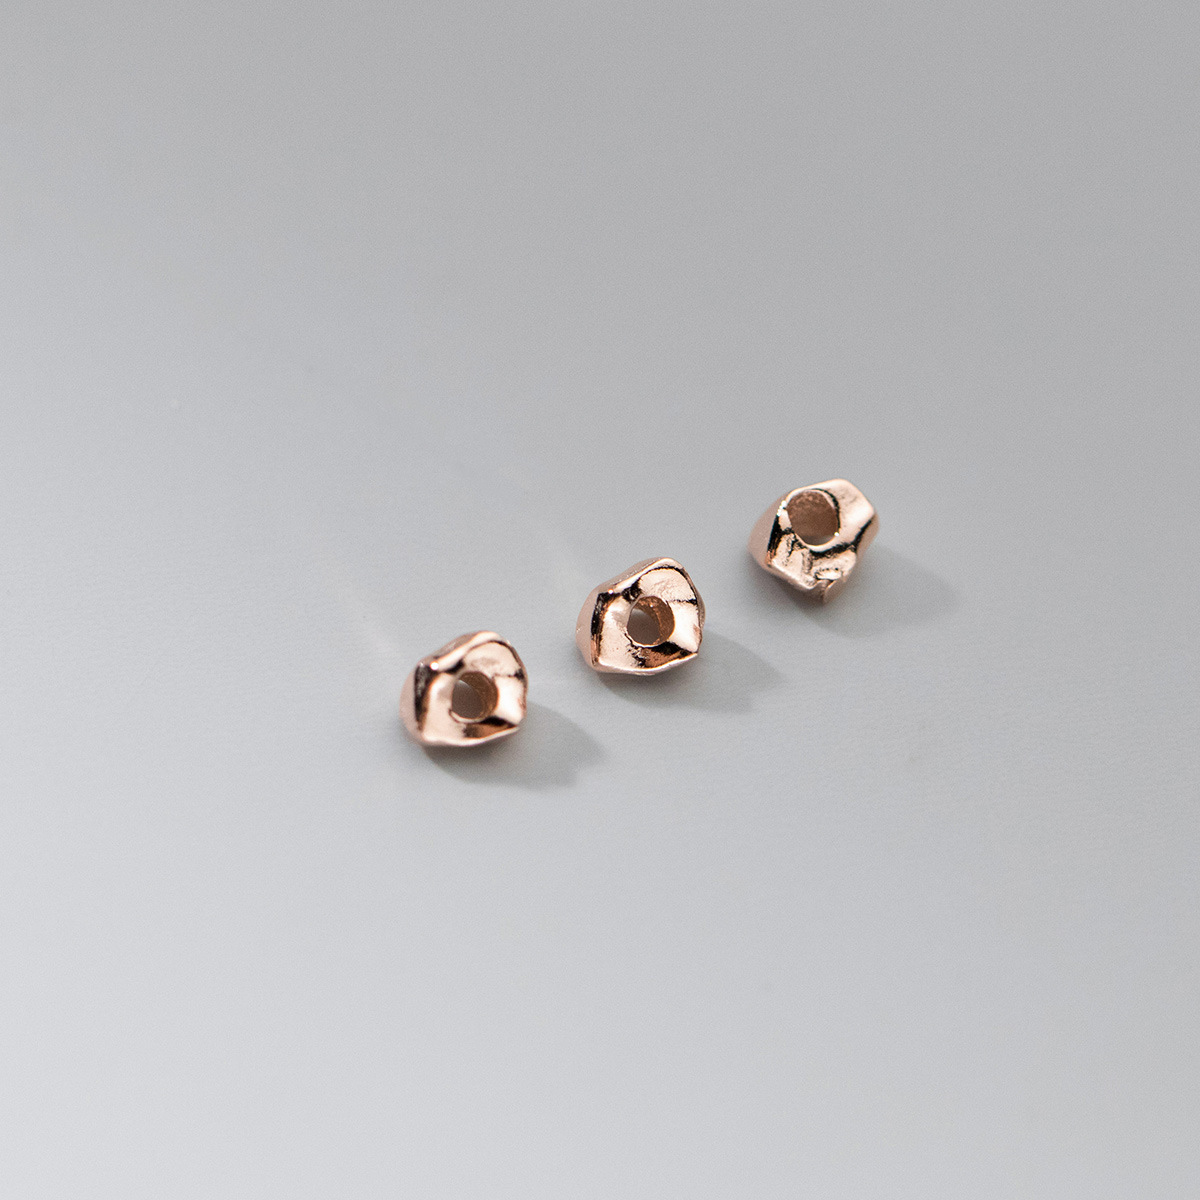 Electroplated rose gold 3mm